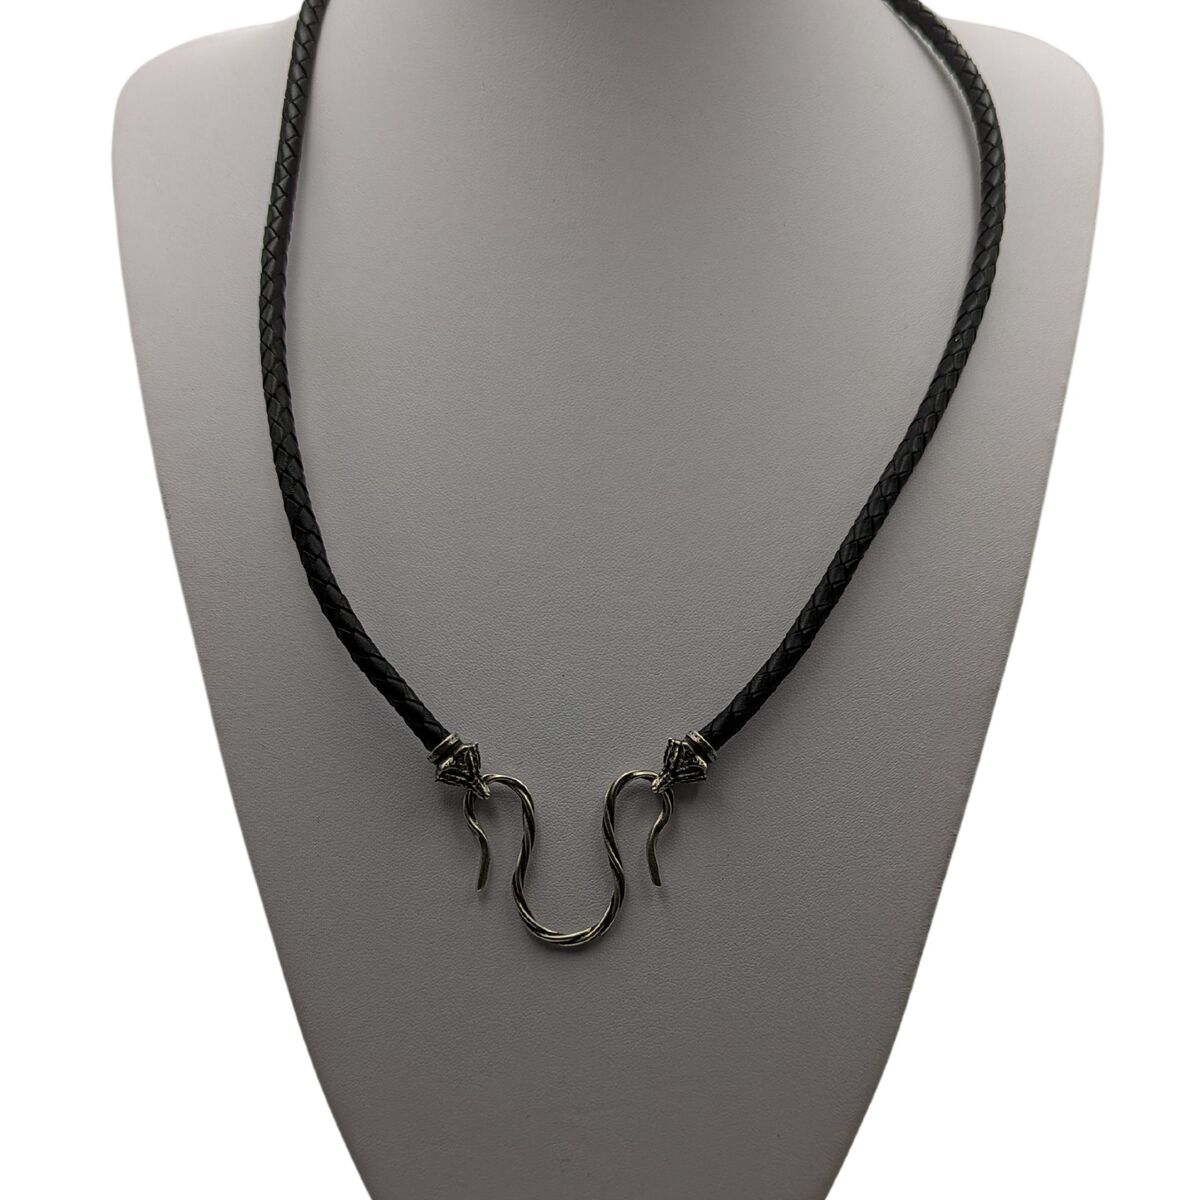 Celtic Fox leather necklace with Silver clasps   